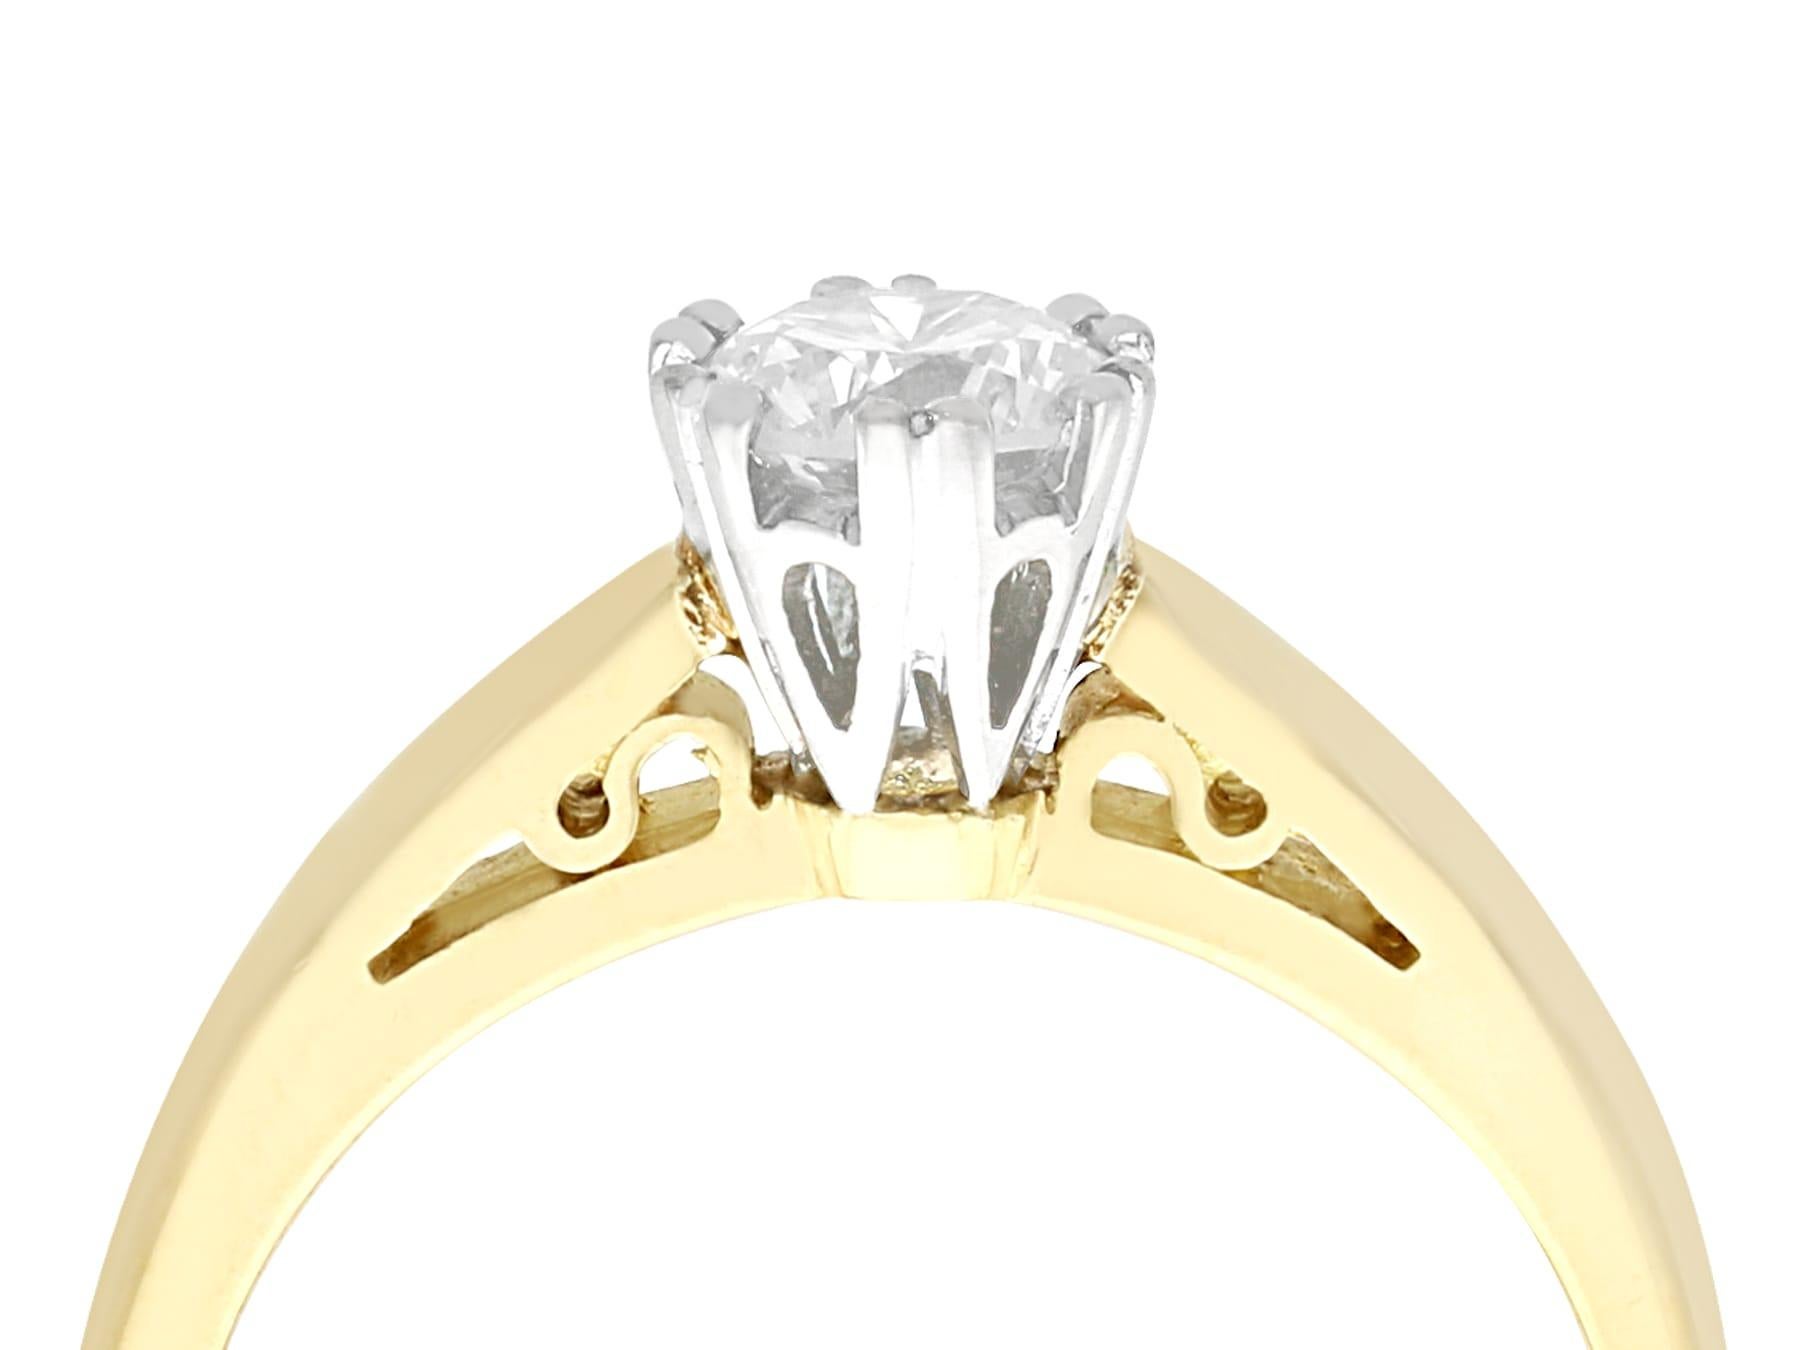 A fine and impressive antique 0.56 carat diamond and 18 karat yellow gold, 18 karat white gold set solitaire engagement ring; part of our diamond jewelry and estate jewelry collections.

This fine and impressive diamond solitaire ring has been